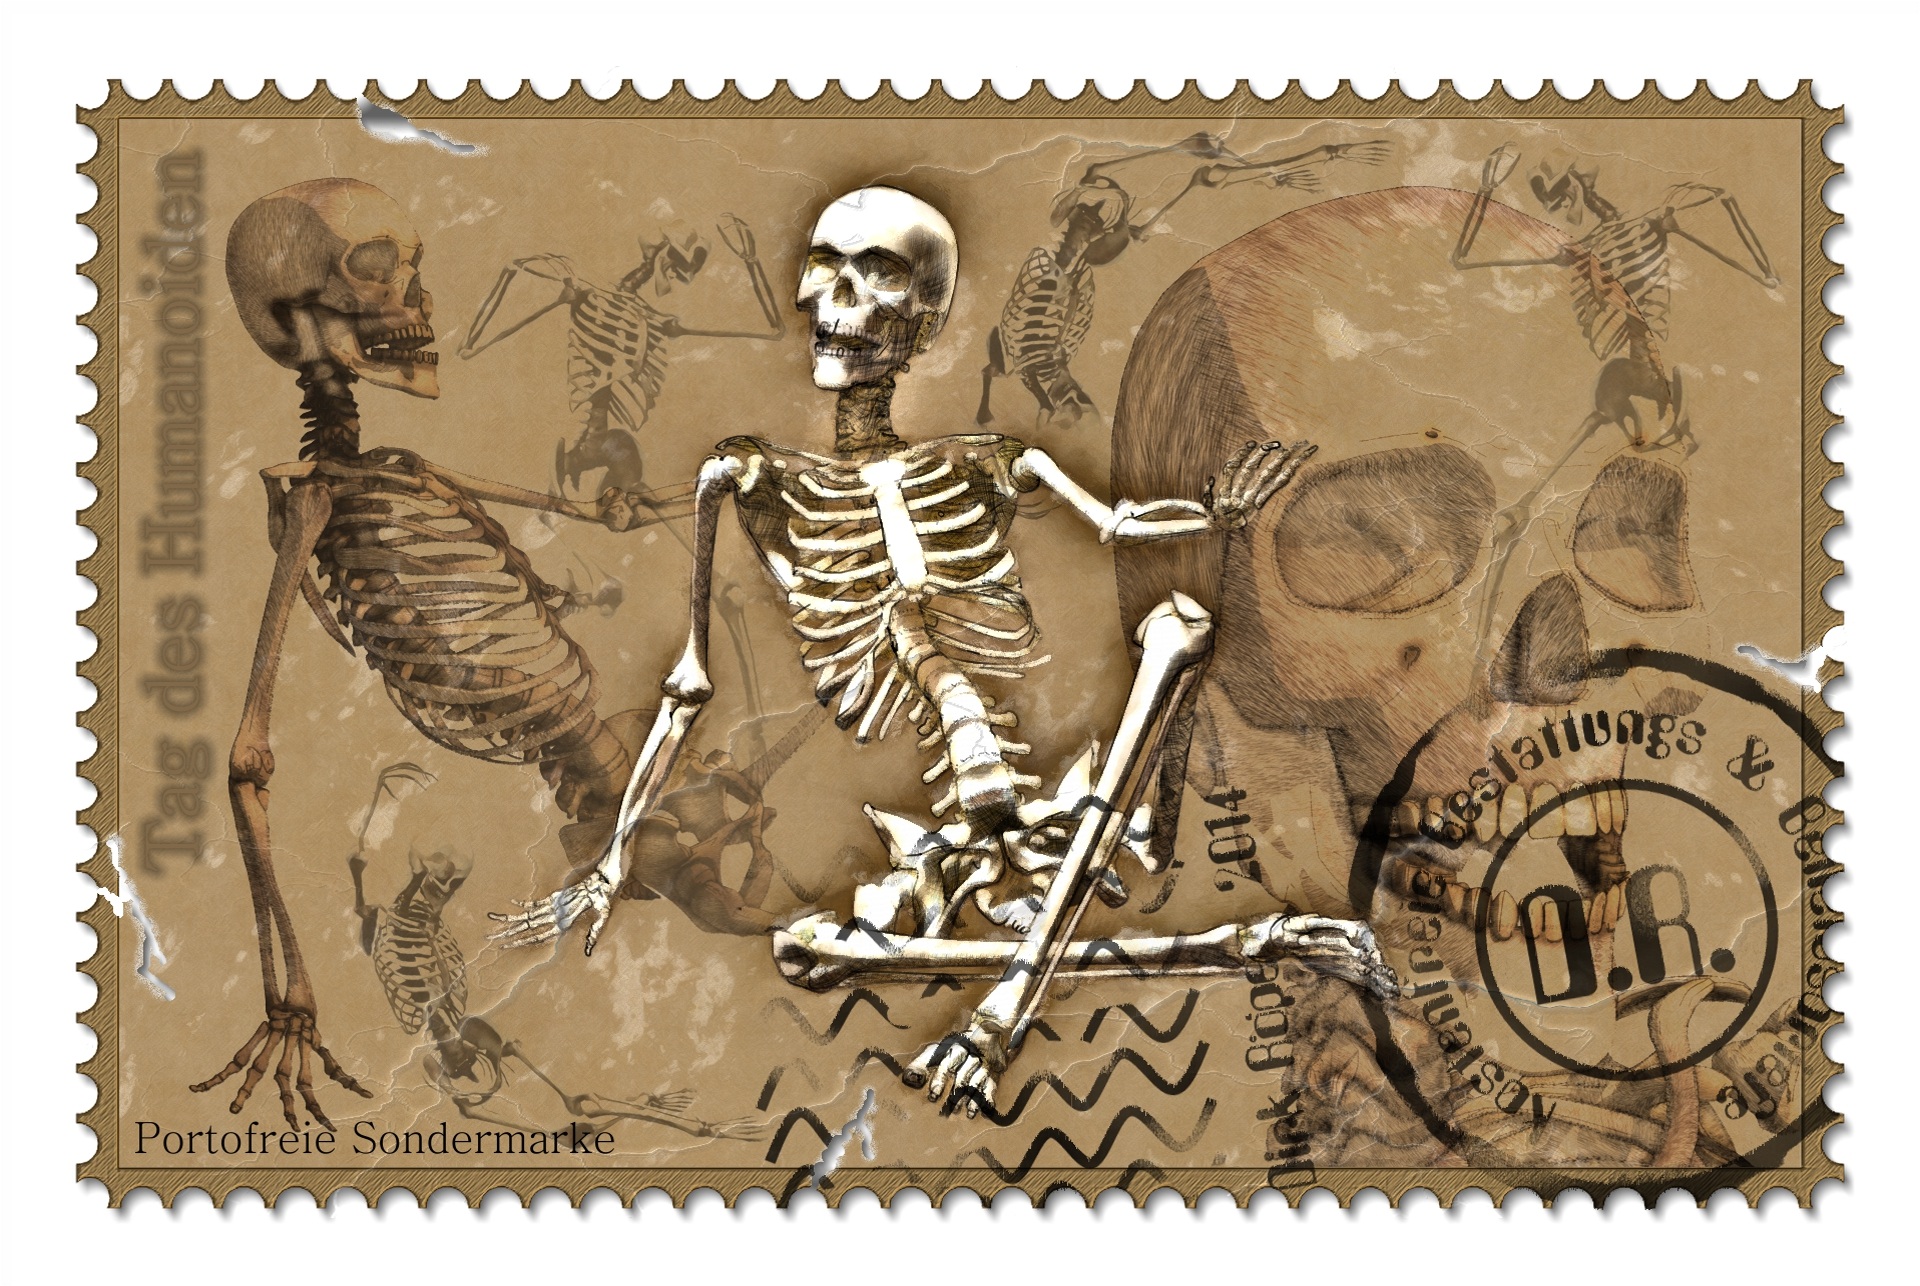 German commemorative stamp by Bommel2012